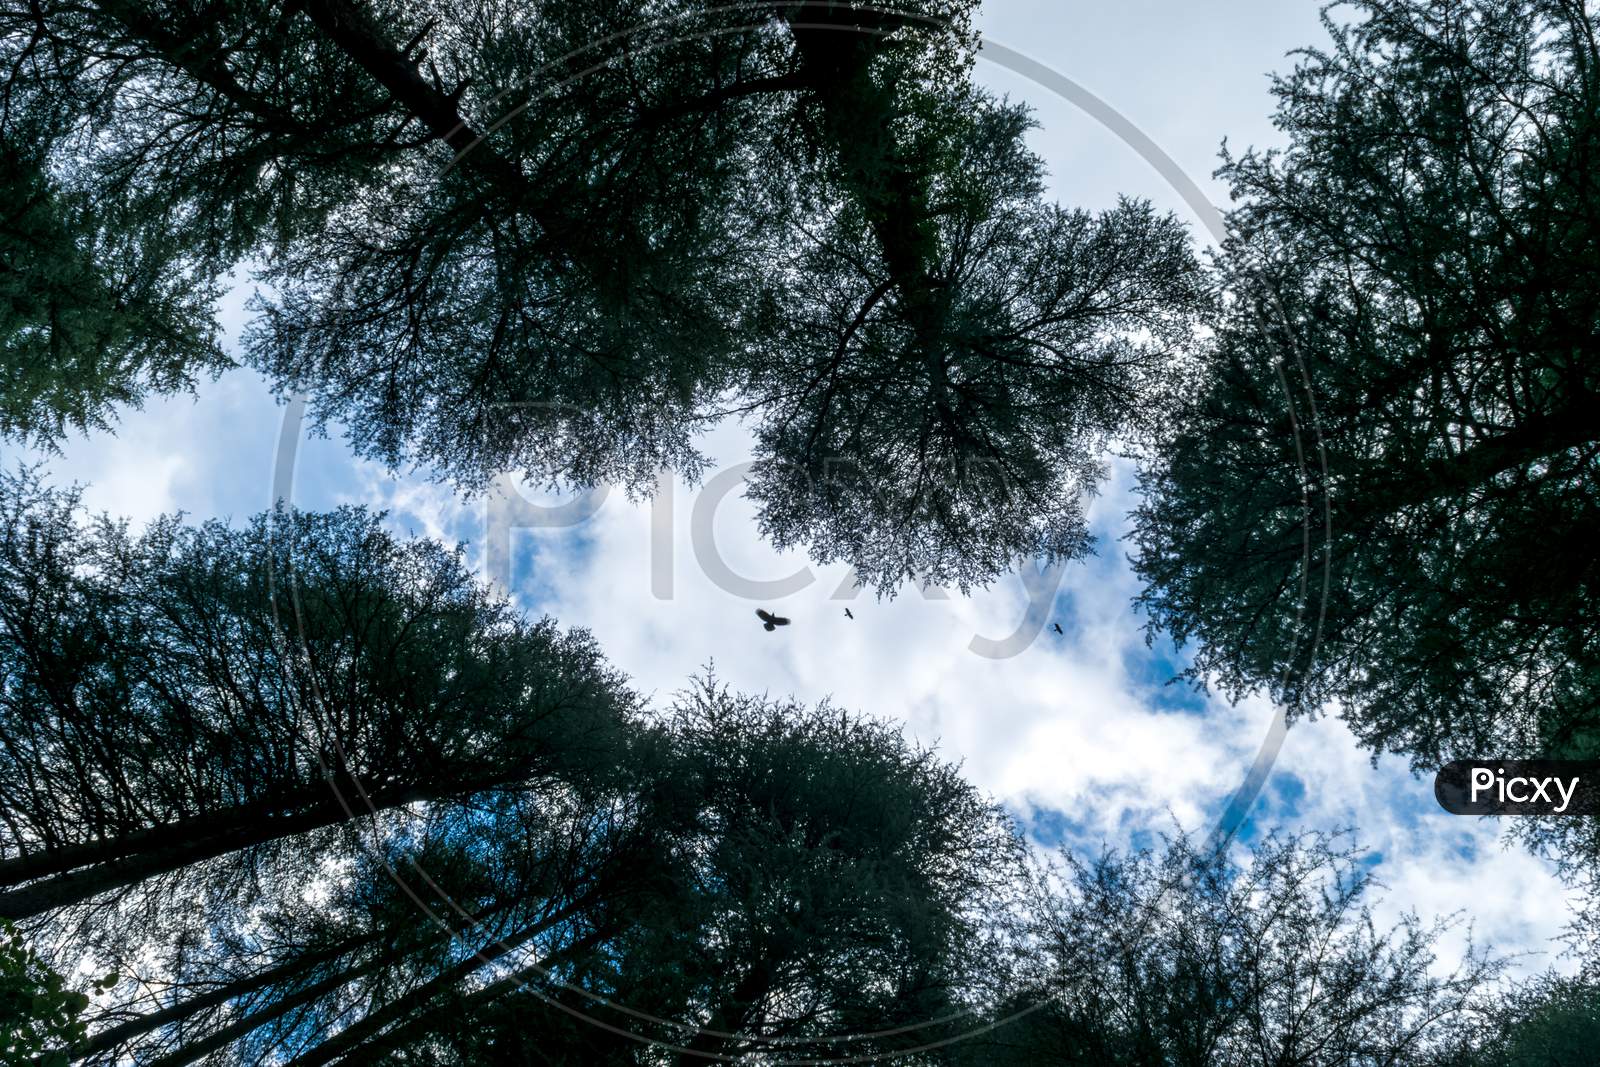 From Below Blue Sky With Few Birds And Cover With Long Pine Trees In Dharmashala, India